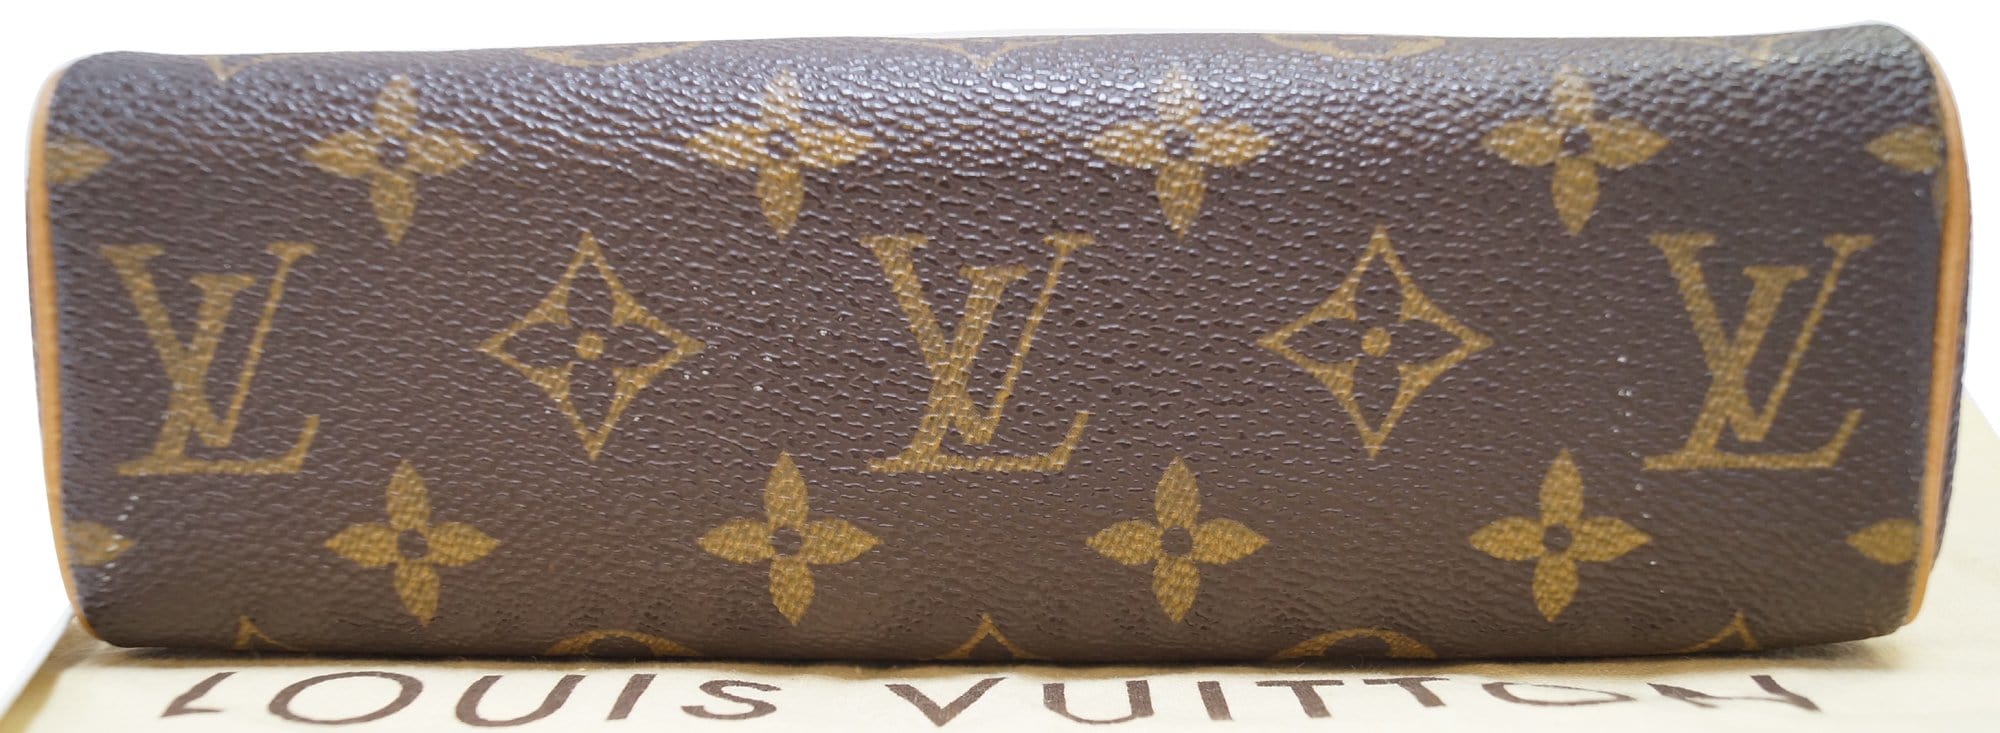 Authentic Louis Vuitton Monogram Recital Purse With Tag & Duster New Never  Used Price: US 475.99 h…